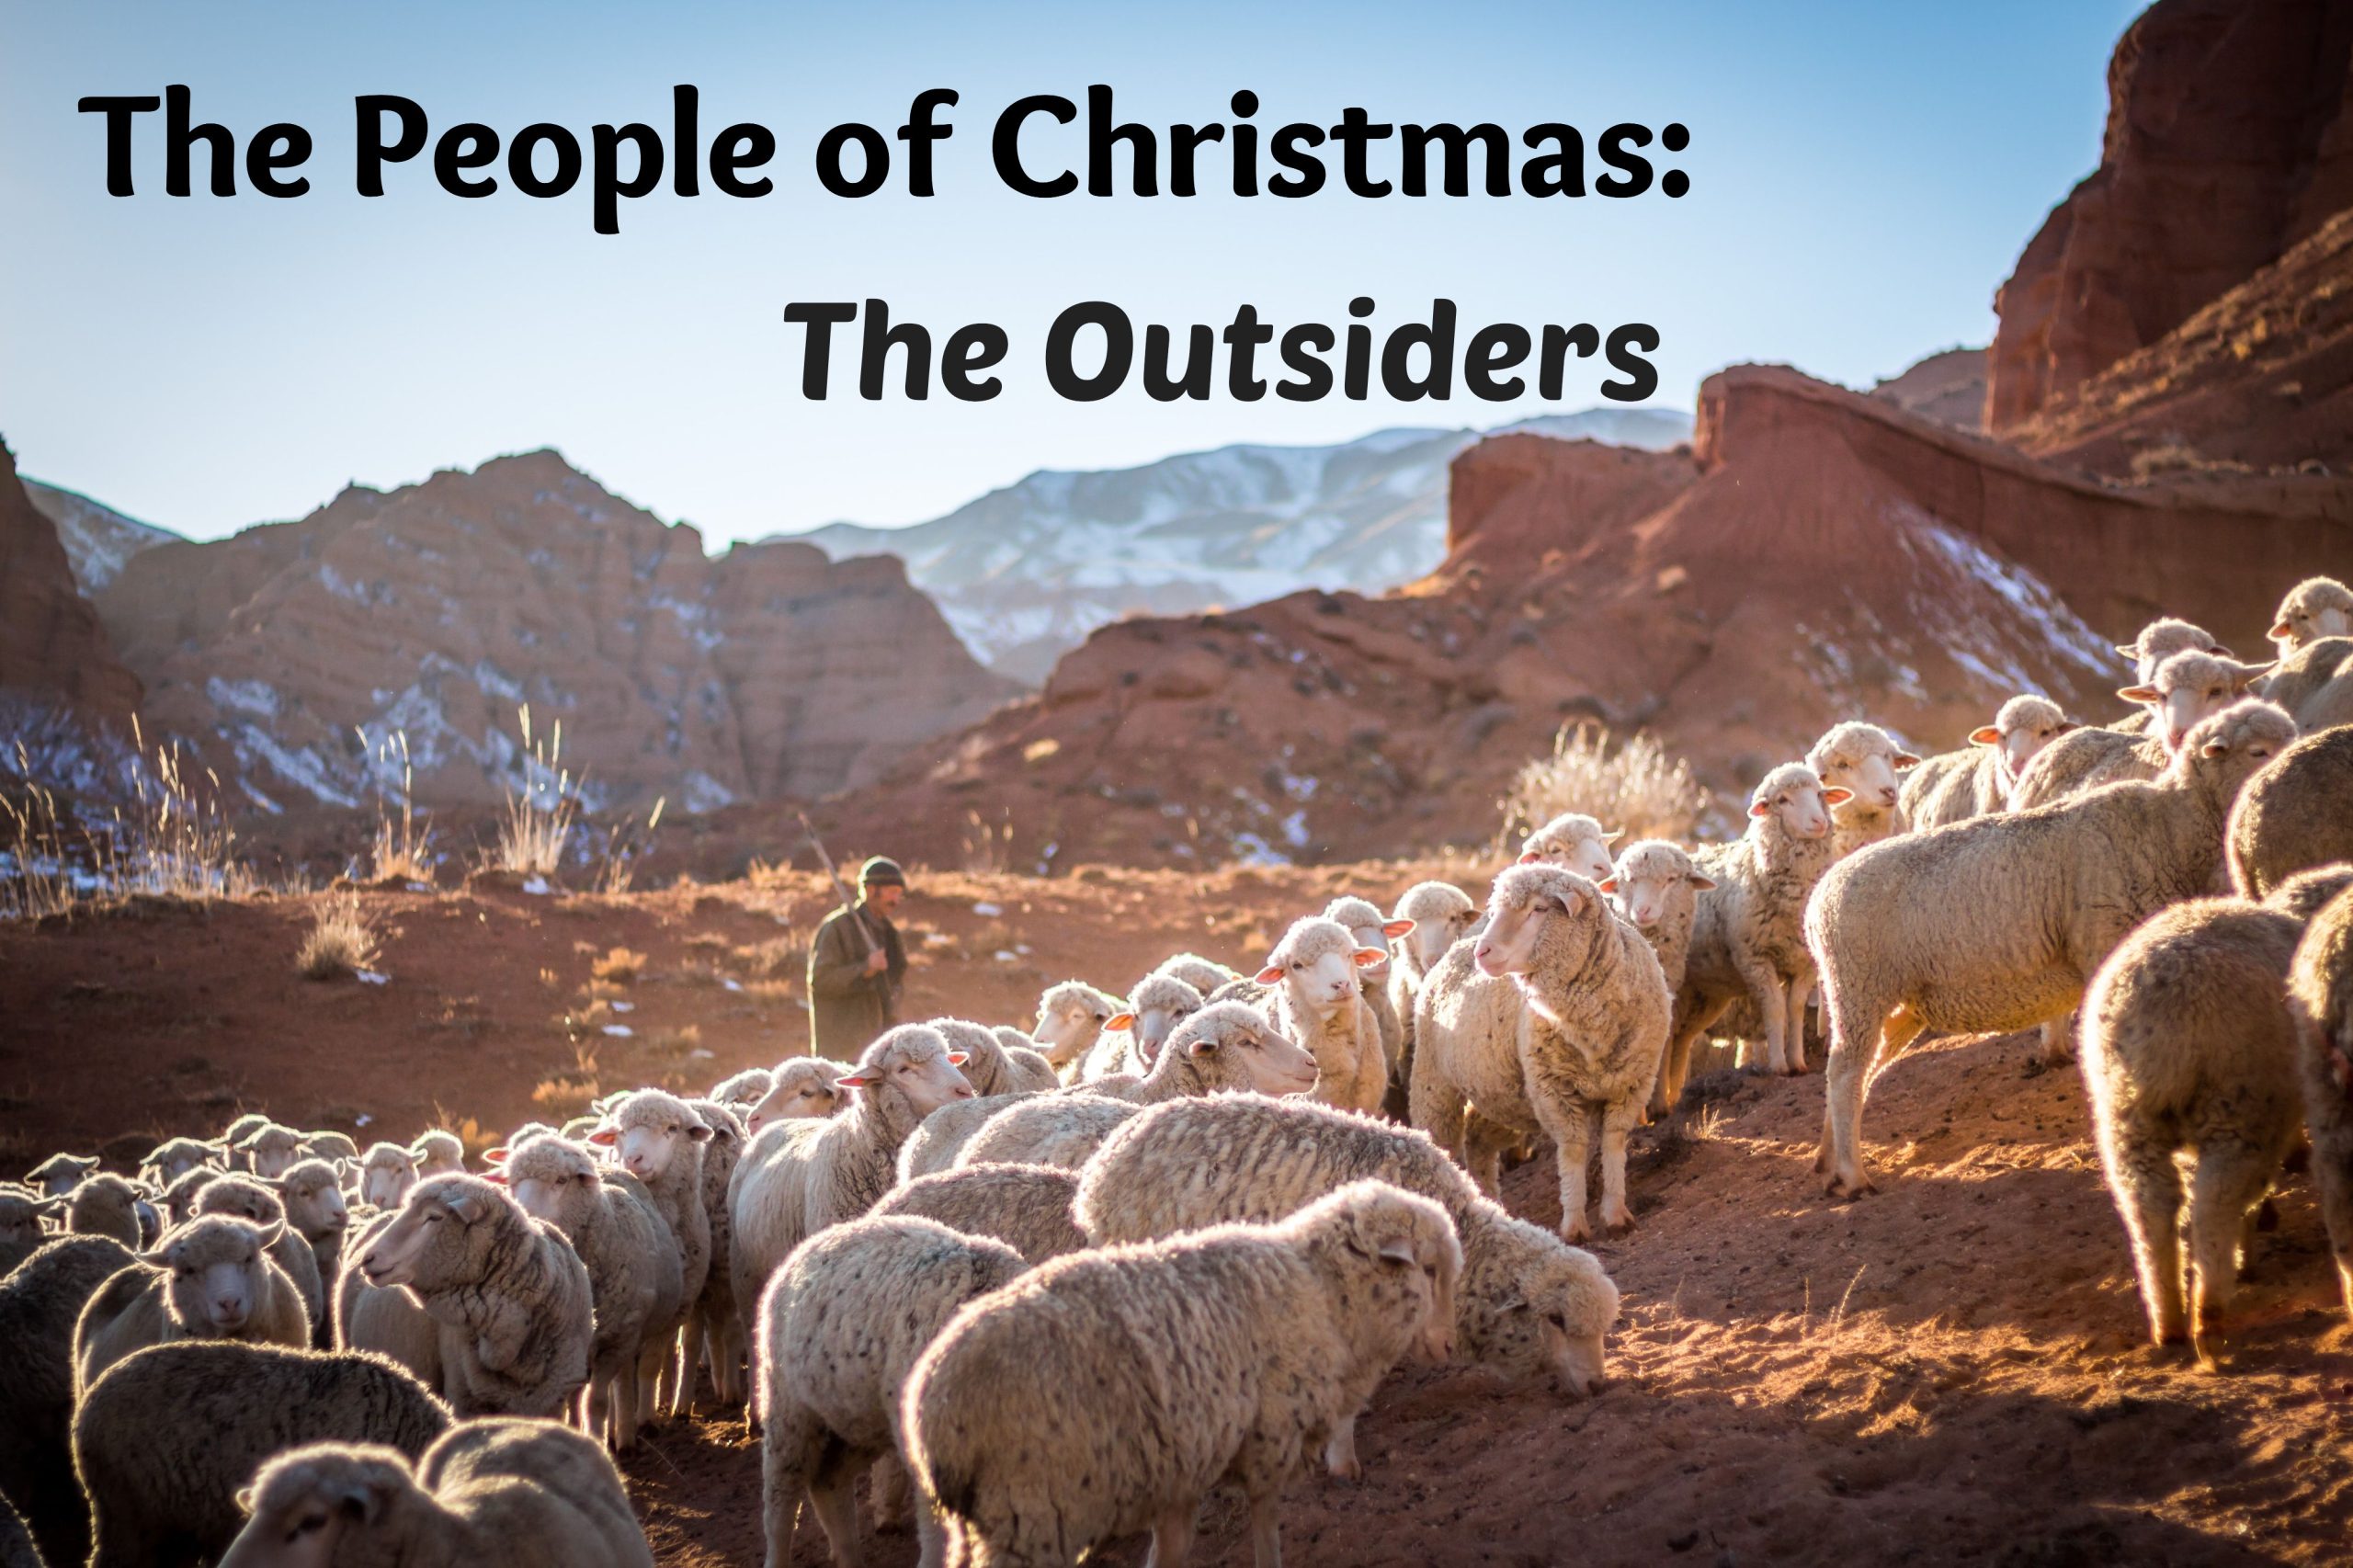 The People of Christmas - The Outsiders